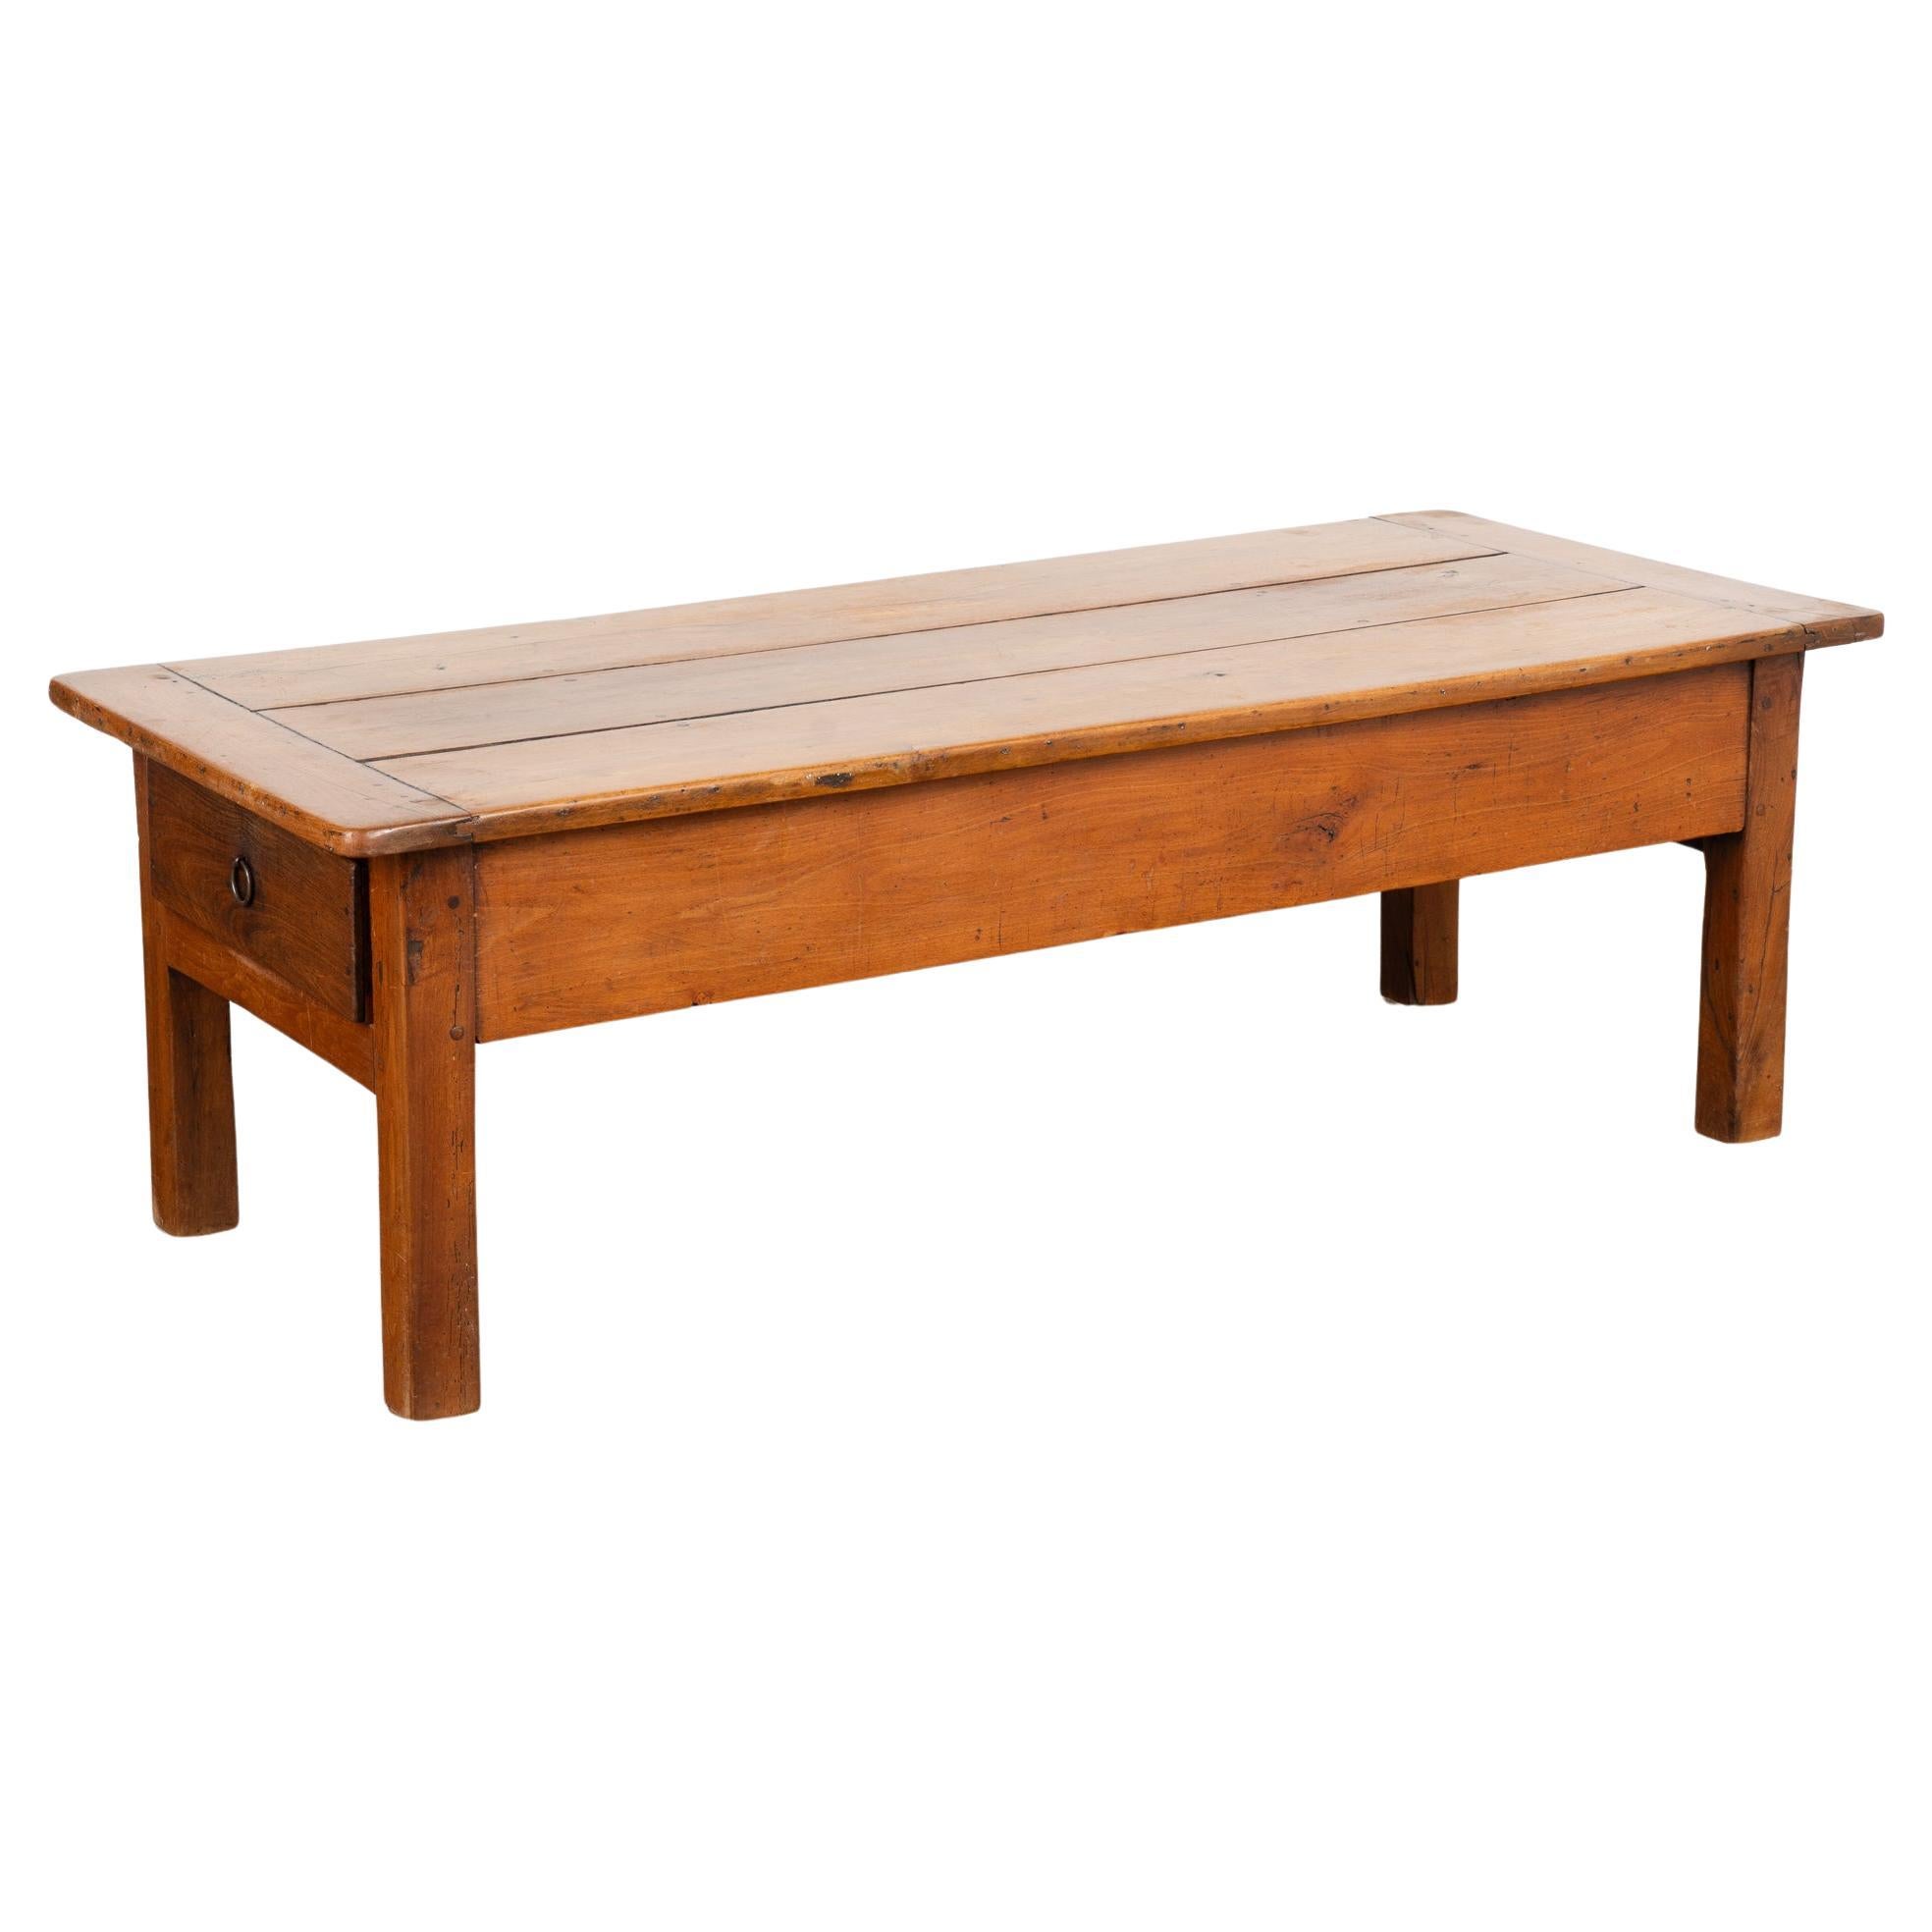 French Country Coffee Table with Two Drawers, circa 1820-40 For Sale